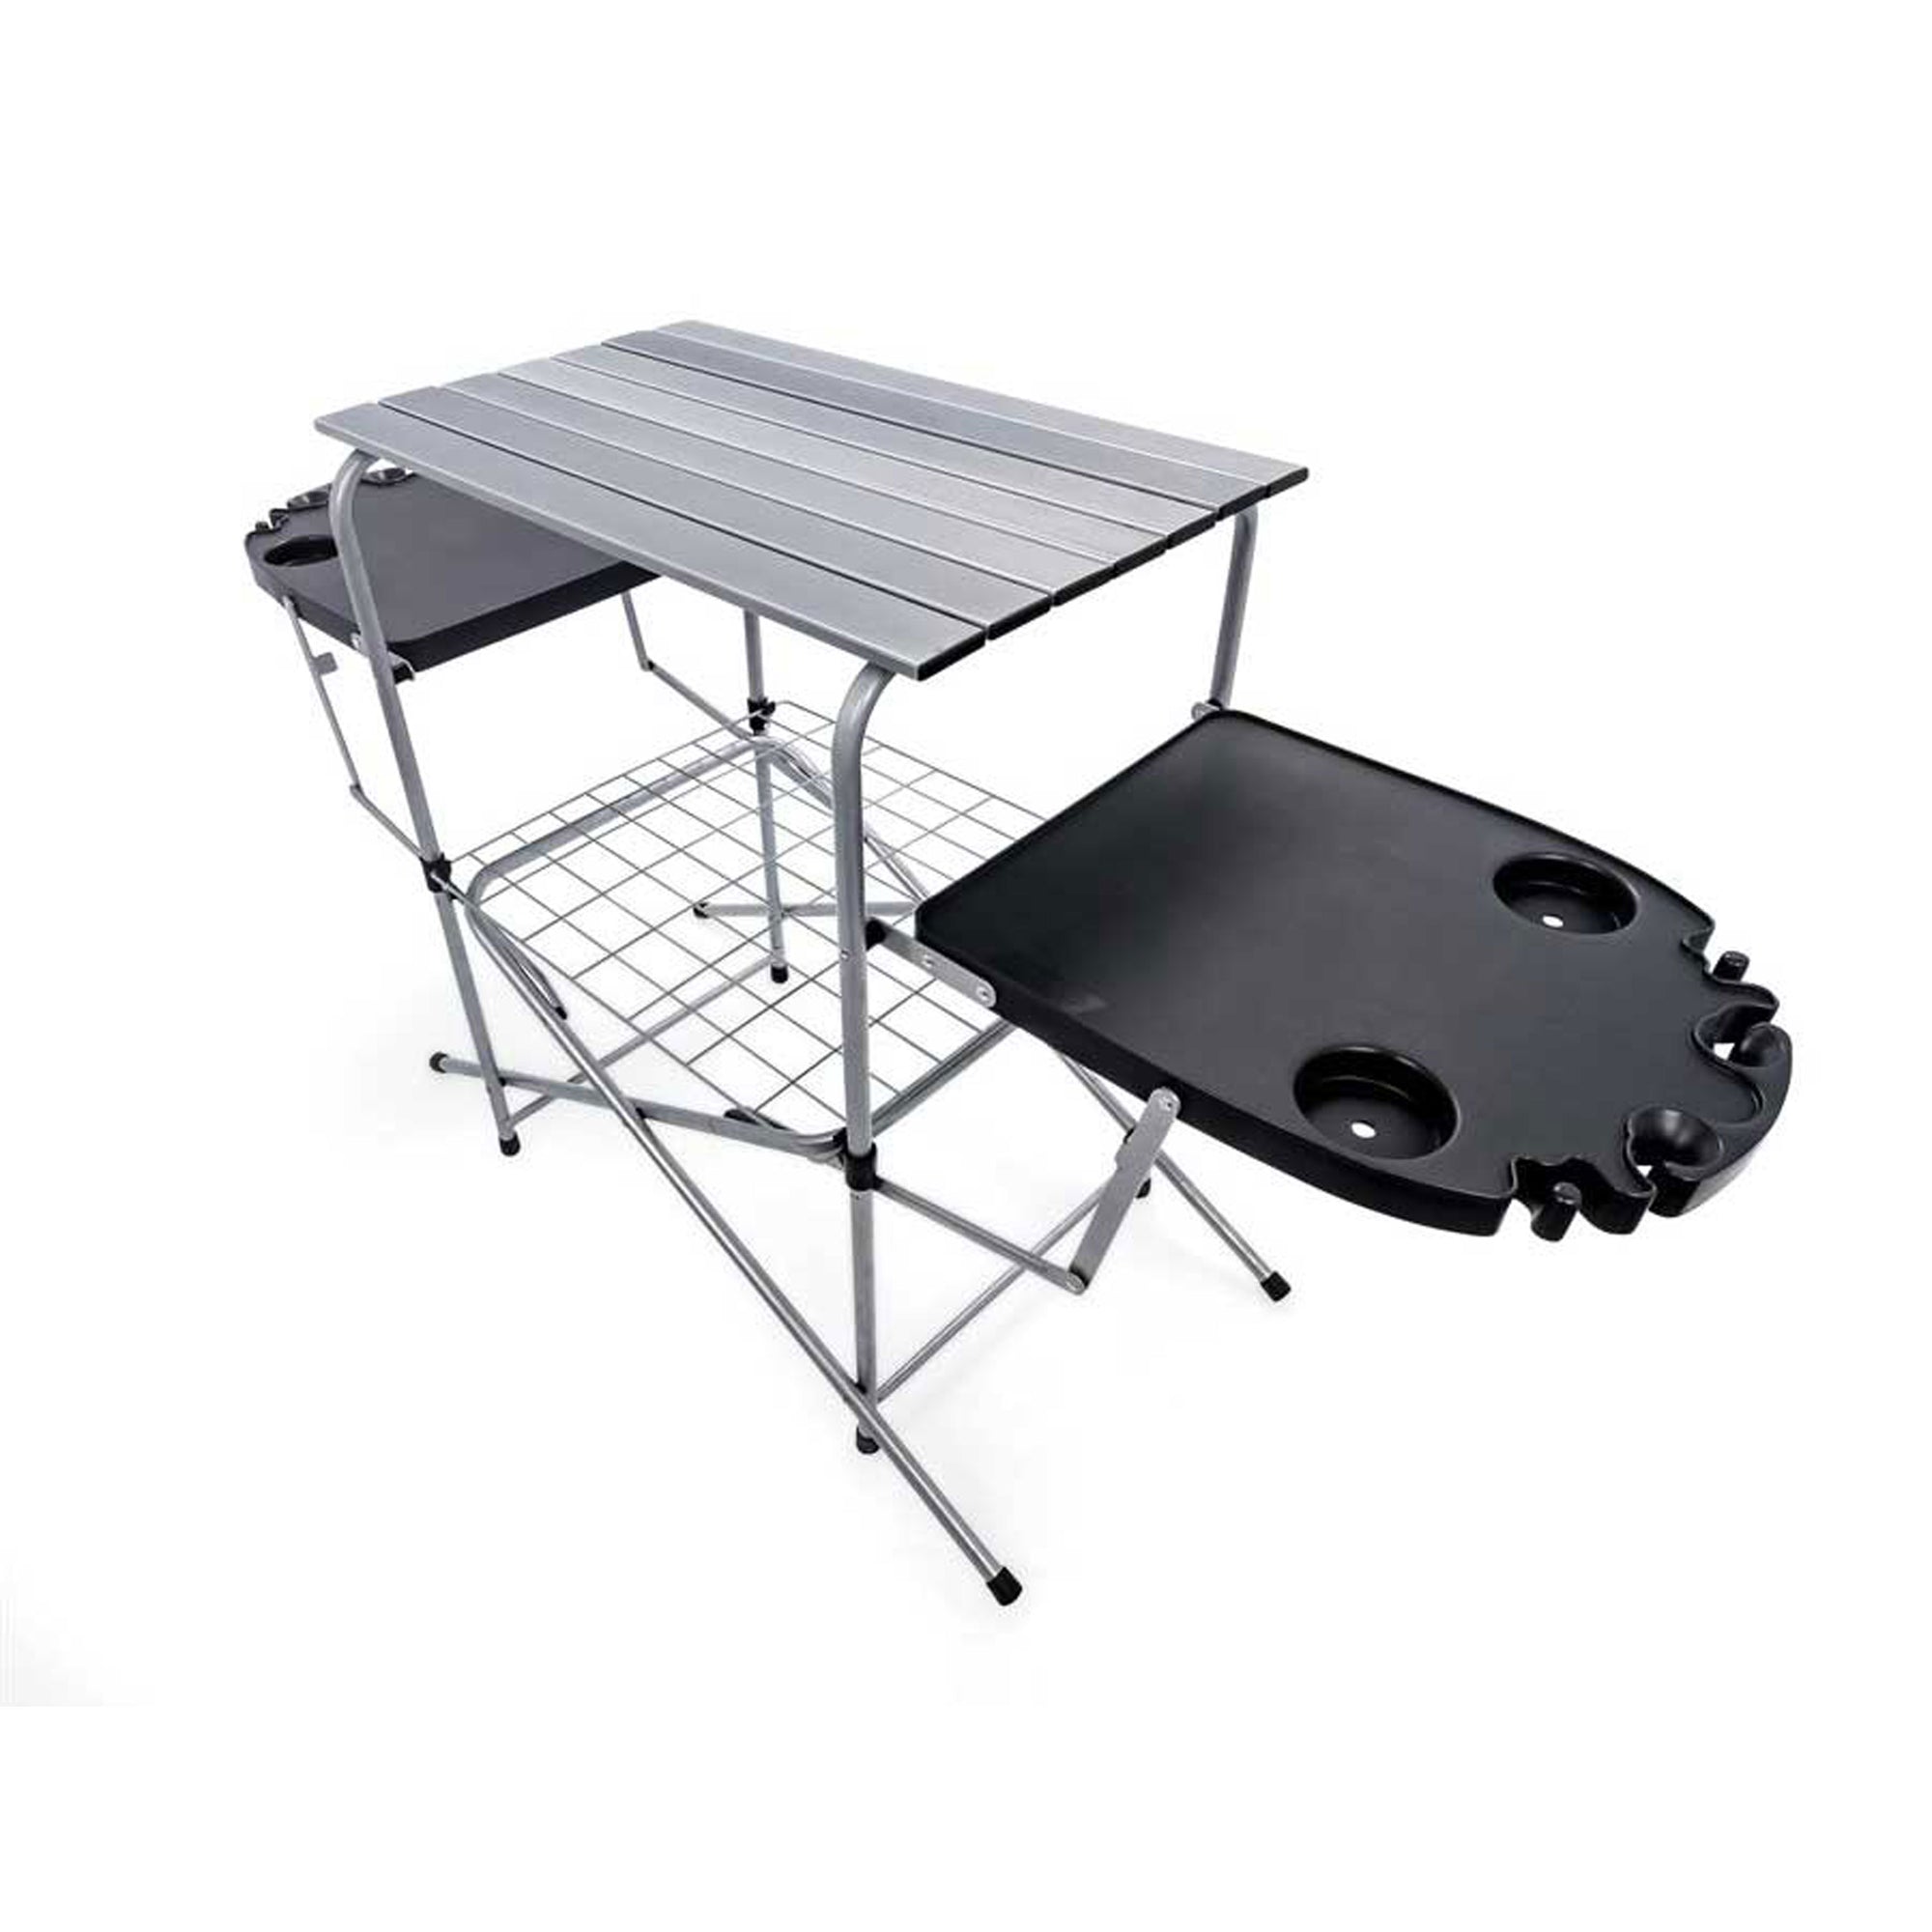 Camco 57295 Deluxe Grilling Table with Plastic Side Tables